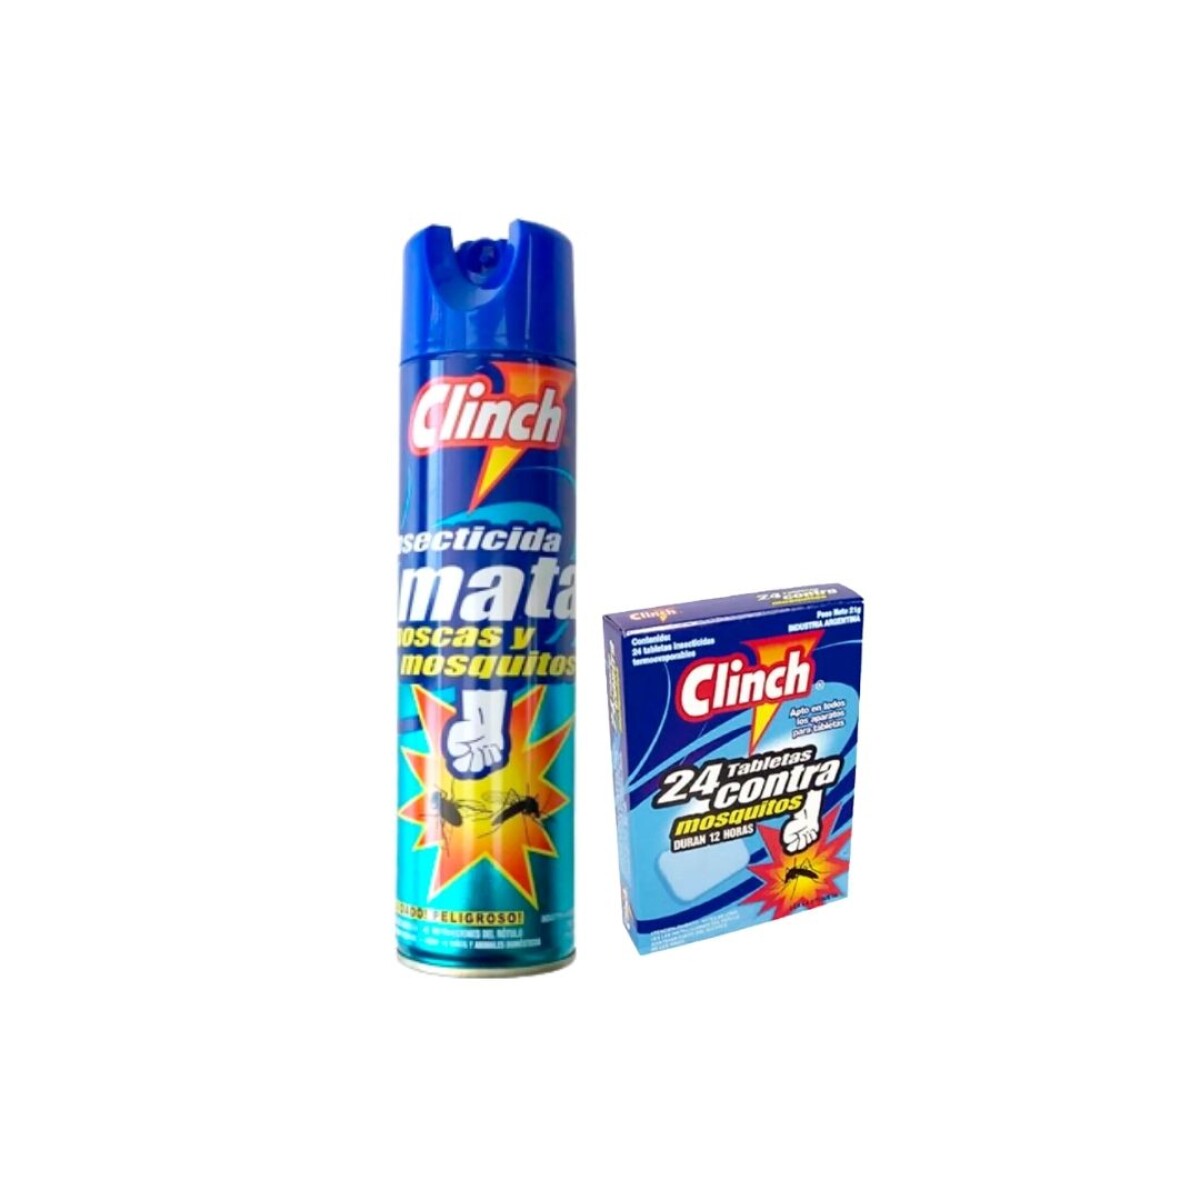 PACK INSECTICIDA CLINCH AZUL MMM + TABLETAS CLINCH 24 UNID 